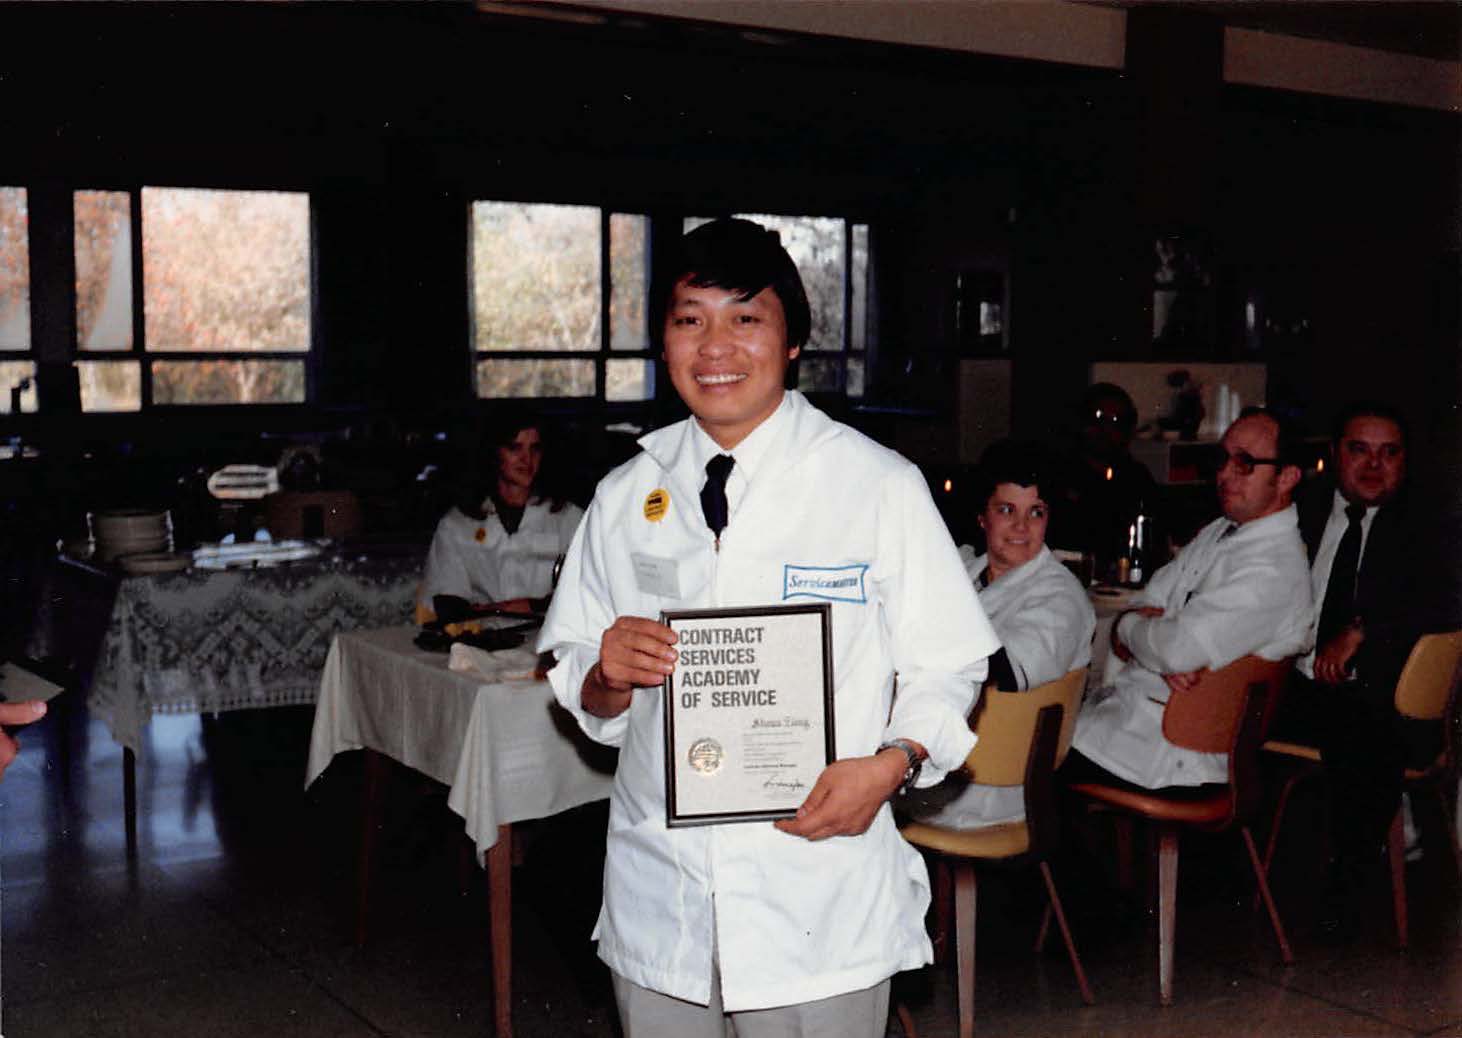 Nao Shoua Xiong, one of the first Hmong refugees to settle in Milwaukee, completed training at Service Master in the early 1980s and opened his own successful cleaning business.